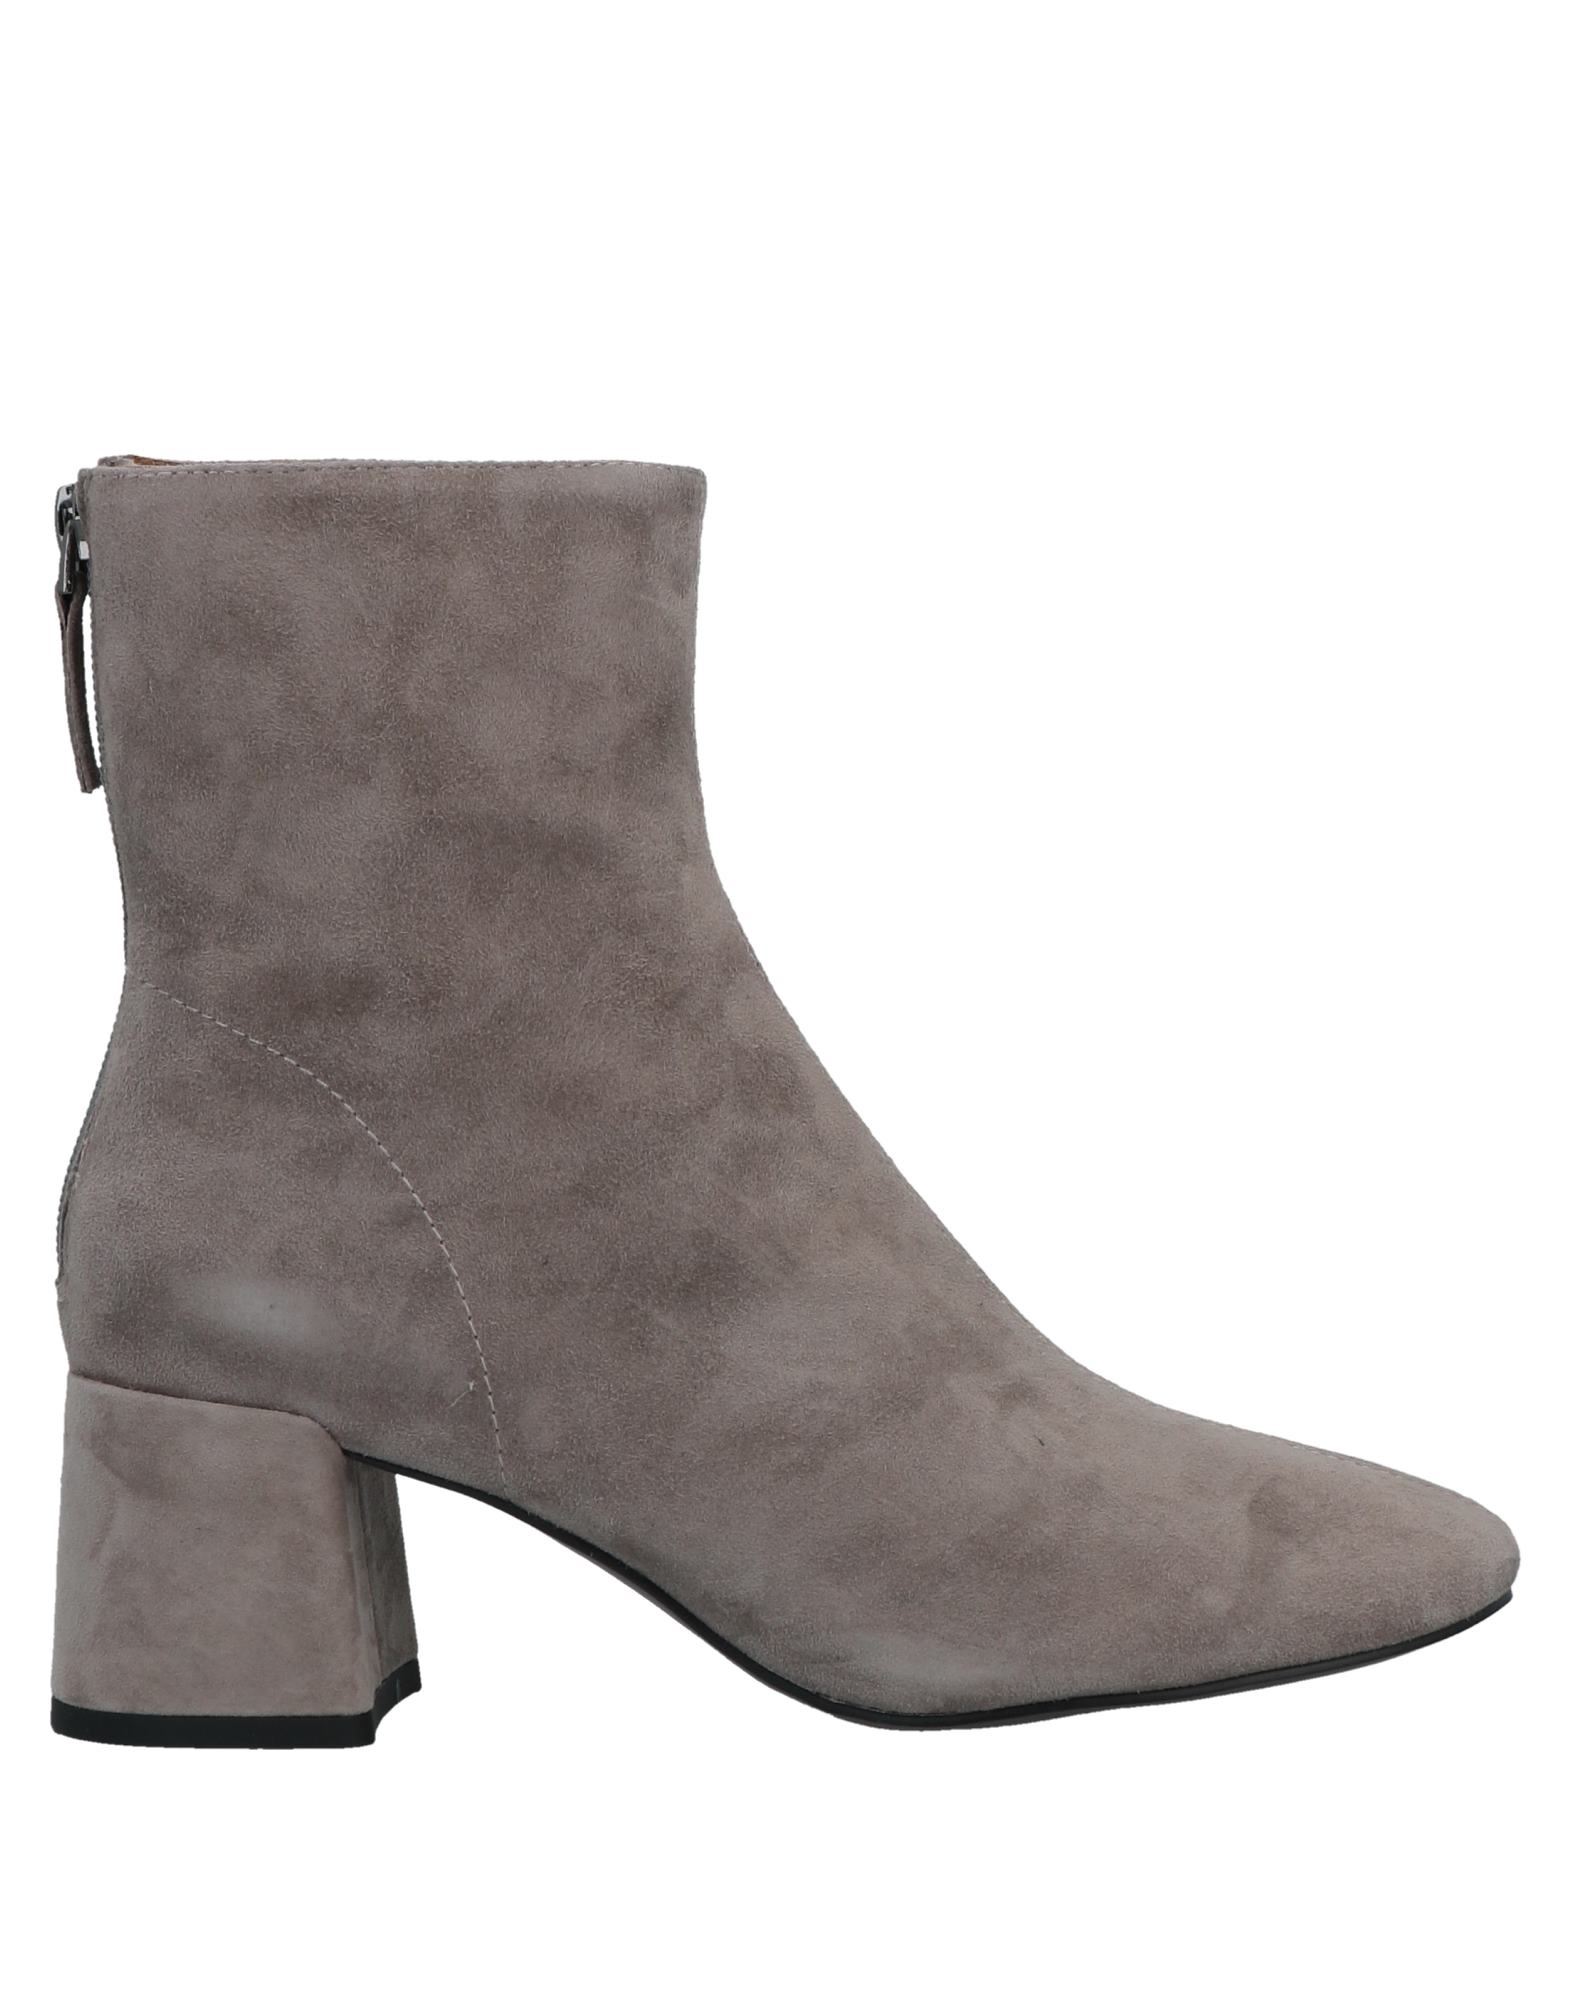 Bibi Lou Ankle Boots In Grey